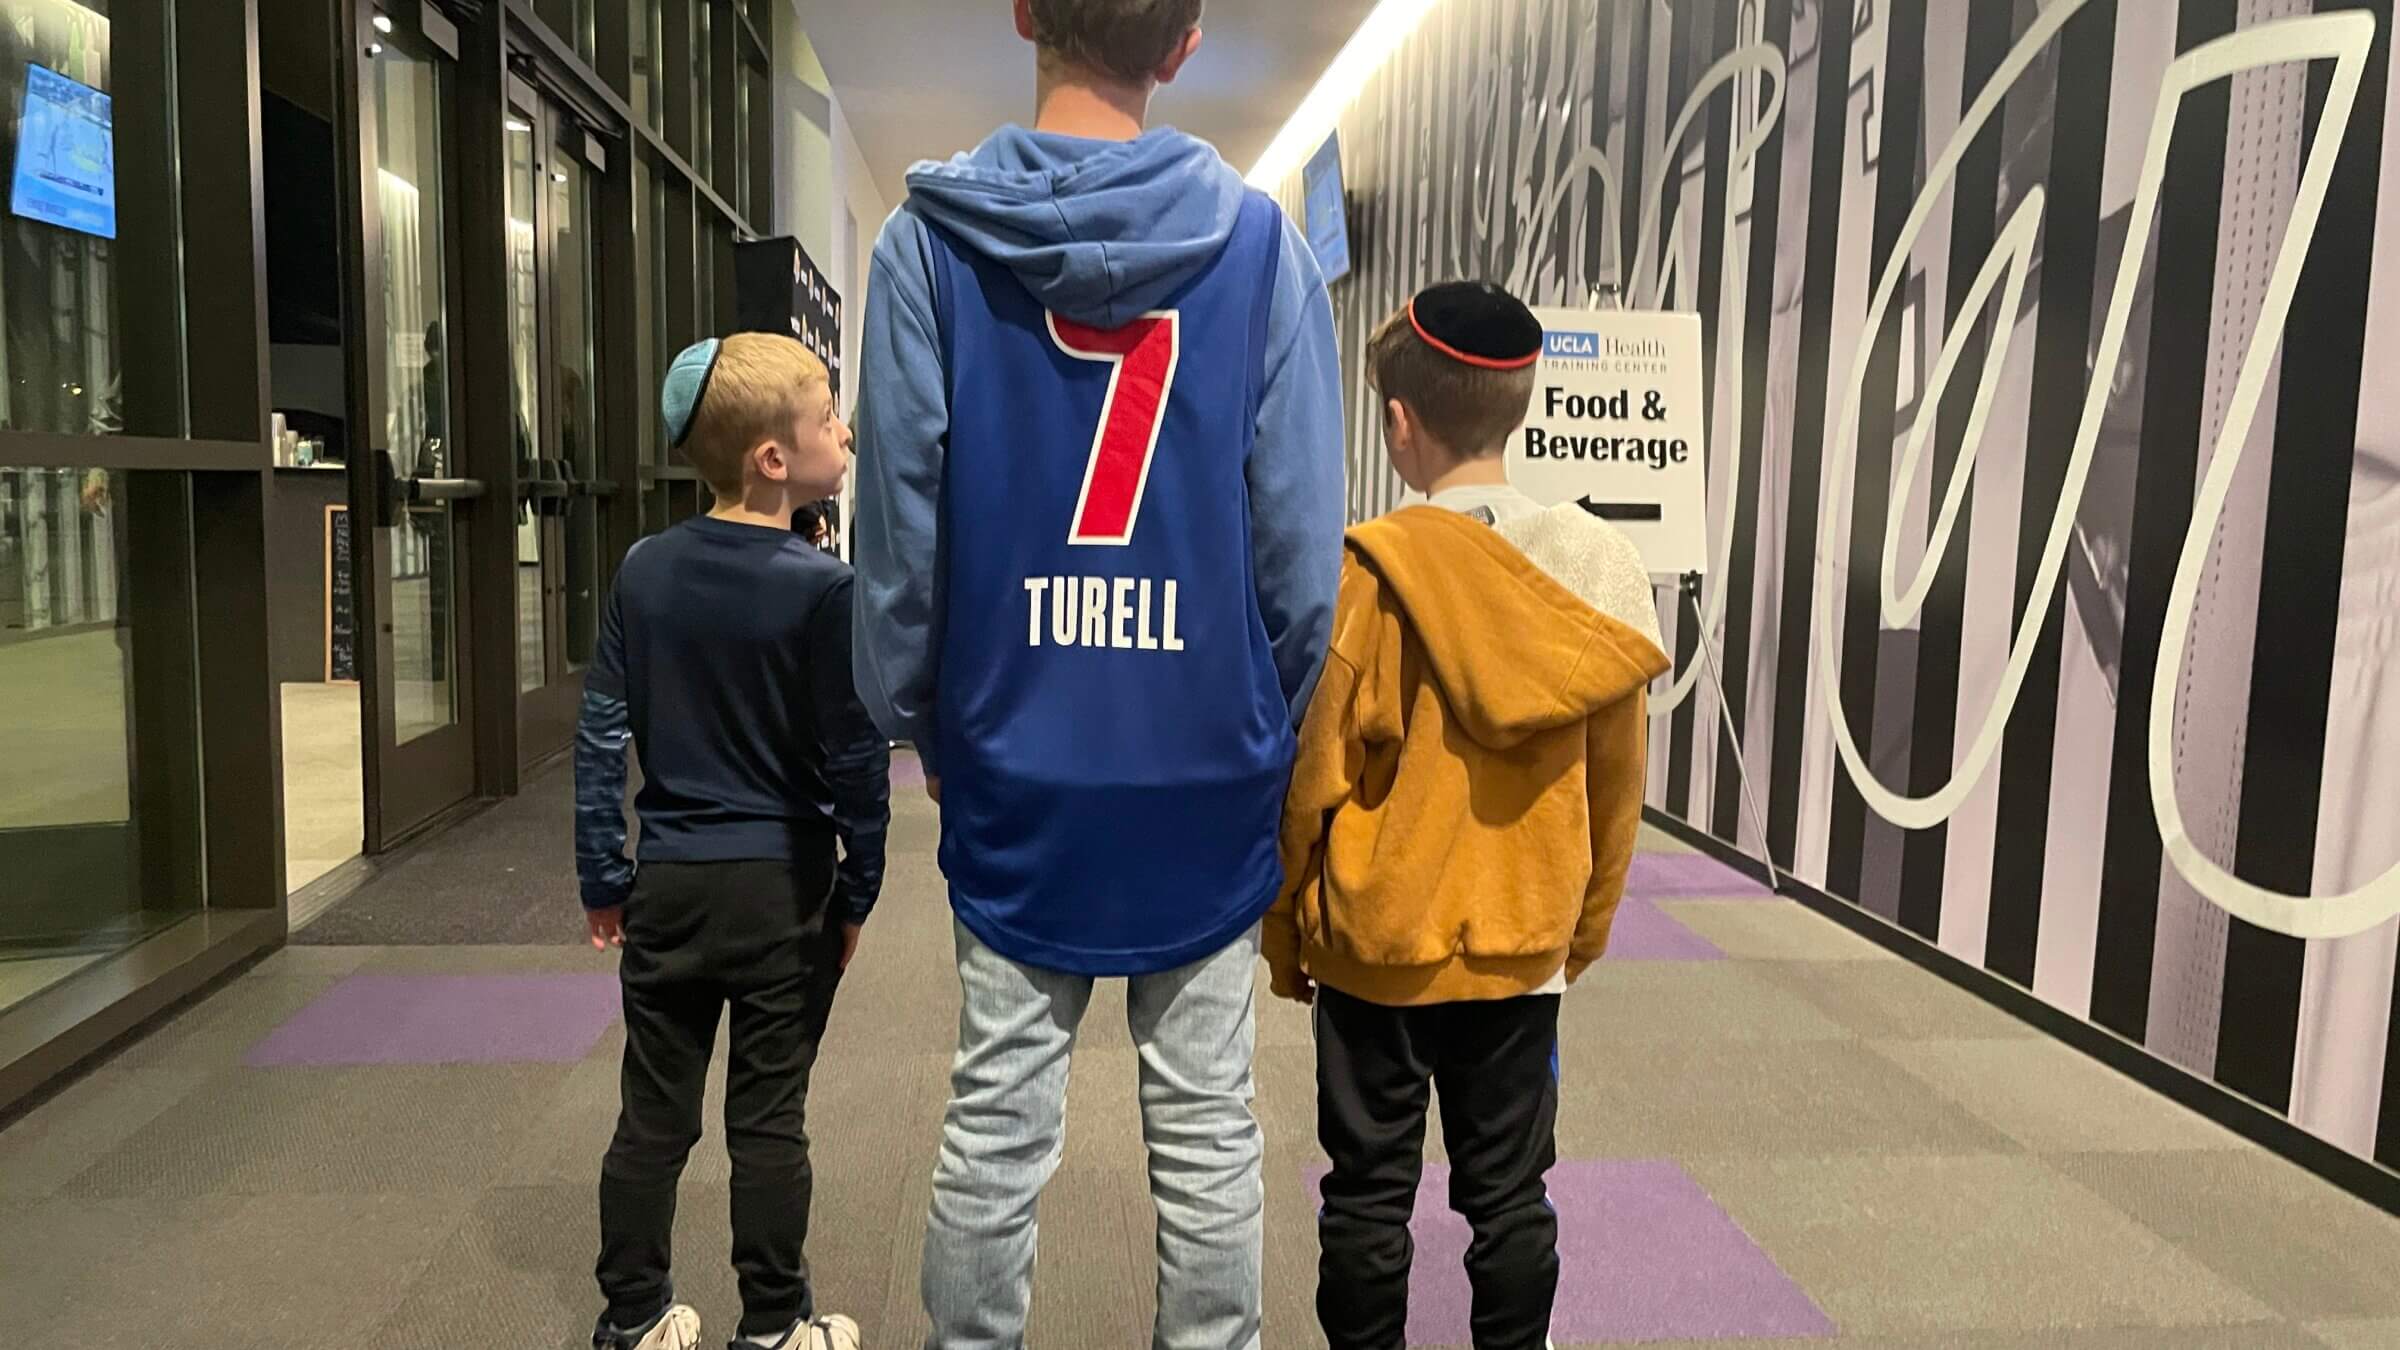 Ryan Turell fans at a G League game in Los Angeles.